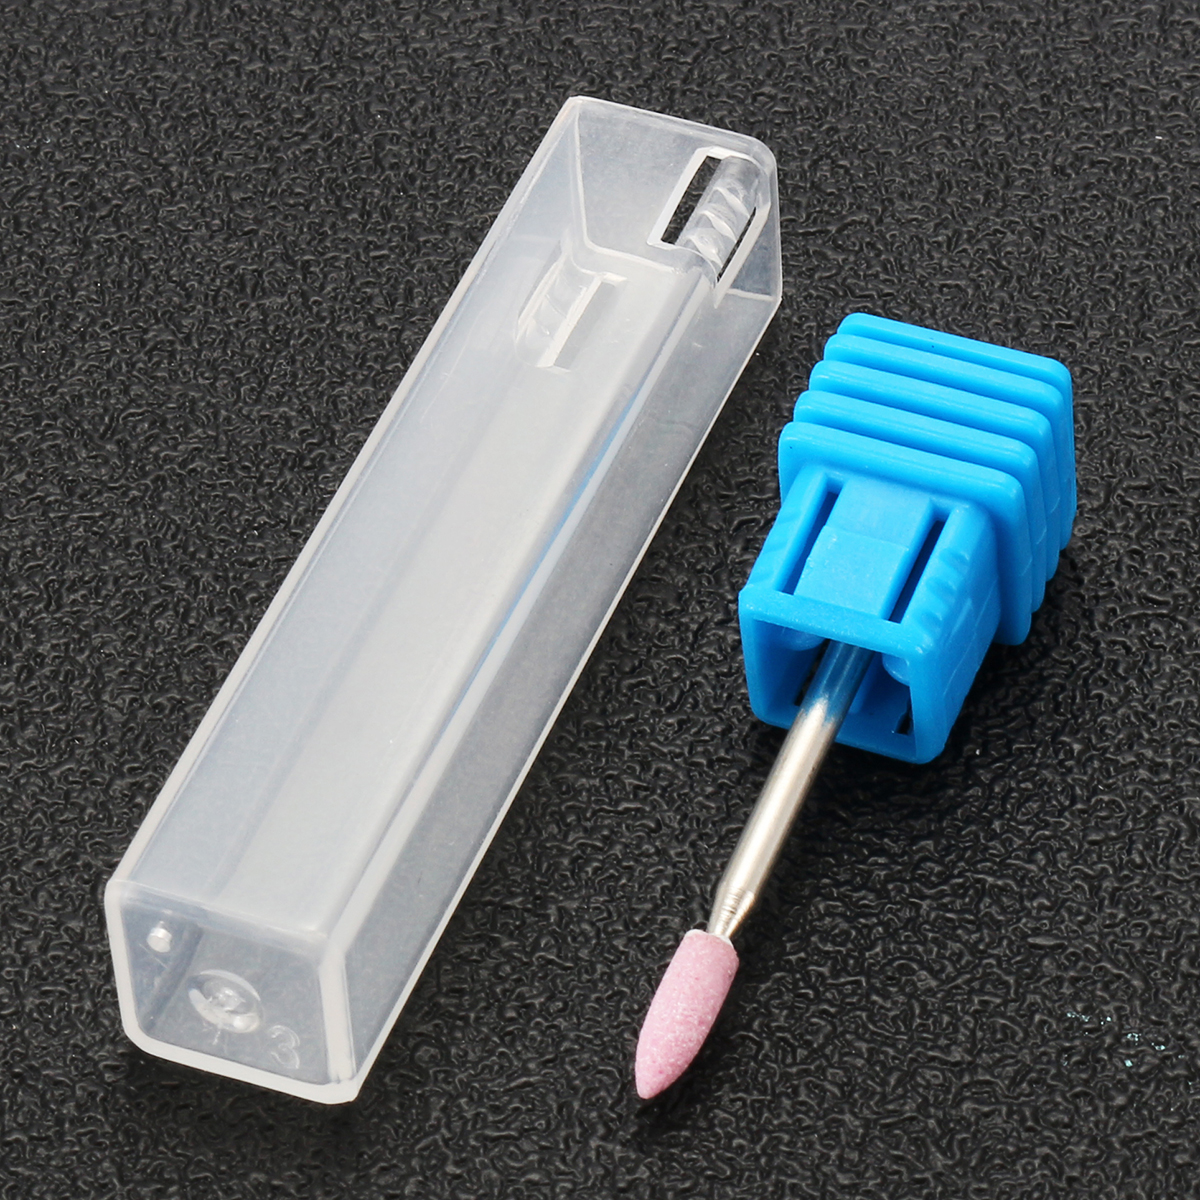 235mm-Pink-Ceramic-Nail-Drill-Bit-Grinding-File-Head-Manicure-Tools-Pedicure-Cuticle-Remover-1146366